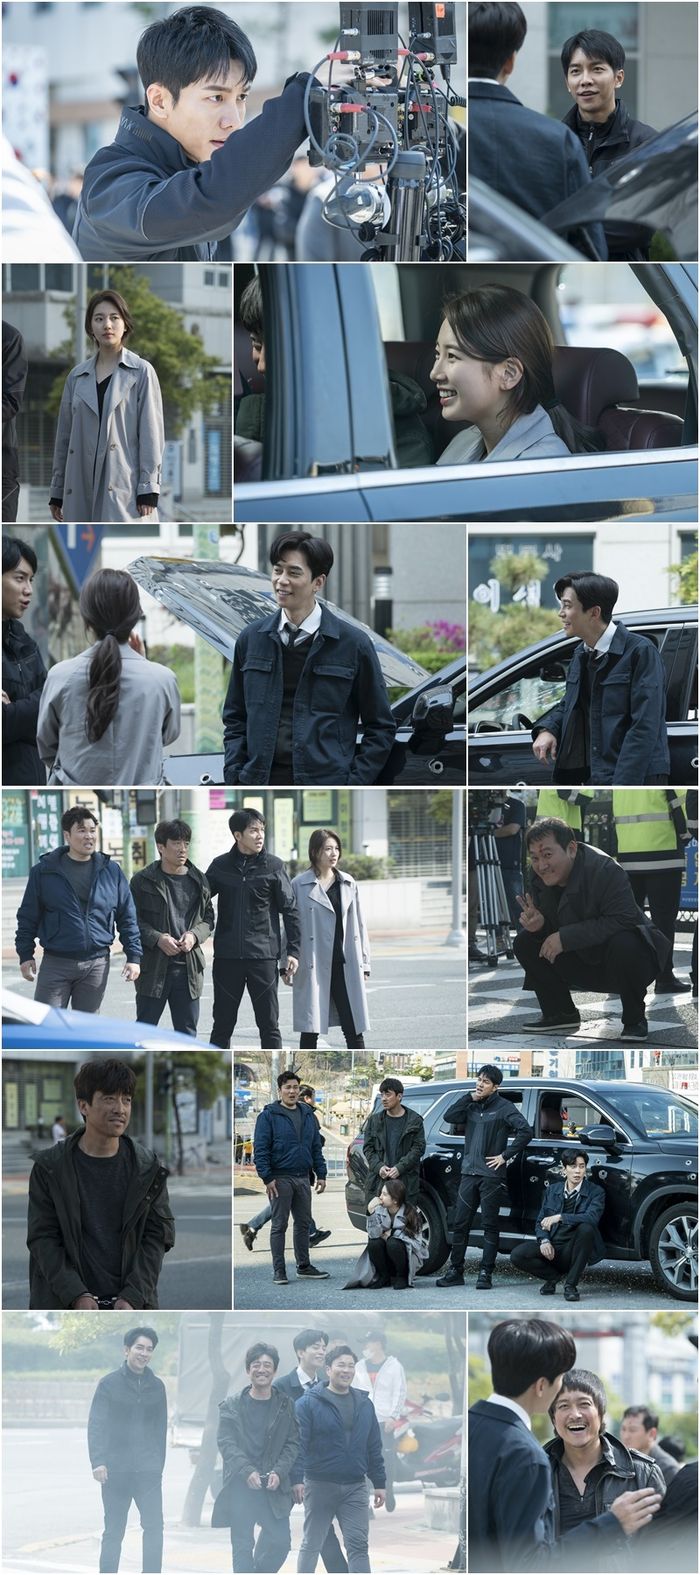 The behind-the-scenes cut of the Vagabond The city shooting scene, which collected topics, was released.In the 12th episode of SBS gilt drama Vagabond (playplayed by Jang Young-chul, directed by Yoo In-sik), which was broadcast on the 26th, the highest audience rating of 13.3% (hereinafter referred to as Nielsen Koreas national shooting) was unfolded as NIS agents such as Lee Seung-gi and Bae Suzy, a car chase chase chase by Jung Man-sik and Choi Dae-chul, and the shooting of the city in extreme confrontation. standards)The highest rate of 2049 viewing rate, which is the main judgment index of advertising officials, was 5.8%, and it was ranked first in terrestrial broadcasting, cable, and general broadcasting.Above all, in the last 12 episodes, Cha Dal-gun and Bae Suzy, along with NIS agents, are carrying out brilliant car-chasings that acrobaticly run between cars on the road to avoid indiscriminate shooting by Jung Man-siks party, and shooting at each other in the middle of Baekju Day in the middle of the city. Blockbuster LLC movie-class large-scale scenes caught the eye.After the broadcast, the reaction of domestic and foreign viewers was also hot. Viewers admired it, saying, I see this quality drama in Korea.Vagabond clearly reveals the identity of the work called Action Intelligence Melody Blockbuster LLC and proved what drama of different dimensions is.On the 29th, the production team released the behind-the-scenes cut of the city shooting scene, which was a hot show that Lee Seung-gi - Bae Suzy - Shin Sung-rok - Jung Man-sik - Shin Seung-hwan - Jang Hyuk-jin - Choi Dae-chul did not buy their bodies.First, Lee Seung-gi arrived early at the scene and relaxed and shook off the tension, and when the actors arrived, they approached and encouraged with the friendlyness of massaging each.In addition, at the same time as the cut sound, I ran to the camera and felt a sense of responsibility to monitor all the shooting of myself and the Ry.Bae Suzy was a human vitamin in the field with a unique bright smile.In addition, he played in the lead of the action scene with his fast running ability and his tough physical strength that surpassed the male actors with him, and he made everyones tongue out.Shin Sung-rok, who is a maker of the atmosphere of the scene, talked with the actors and staffs together and laughed brightly, but when he heard shooting, he was impressed with his professional look.In addition, when the tension falls down by repeating the intense action god, I gave a silent support by patting the back of the Rys.Jung Man-sik made the scene into a laughing sea with a playful force to draw a V when he saw the camera that was turned on even when he was angry and evil, and Jang Hyuk-jin was enthusiastically shooting without any signs of discomfort even in heavy handcuffs.Choi Dae-chul also washed the blood of the person who laughed and laughed with the gums, unlike the image of the expressionless murder weapon in the play.Celltrion Entertainment said, I think it was a scene that could never be born without the infinite passion and sticky teamwork without the instructions of Actors. It was hard, but I am glad that the scene was full of speed and energy.Meanwhile, Vagabond 13th will be broadcast at 10 pm the next night after being defeated on November 1 due to Korea vs. Puerto Rico Baseball Evaluation.